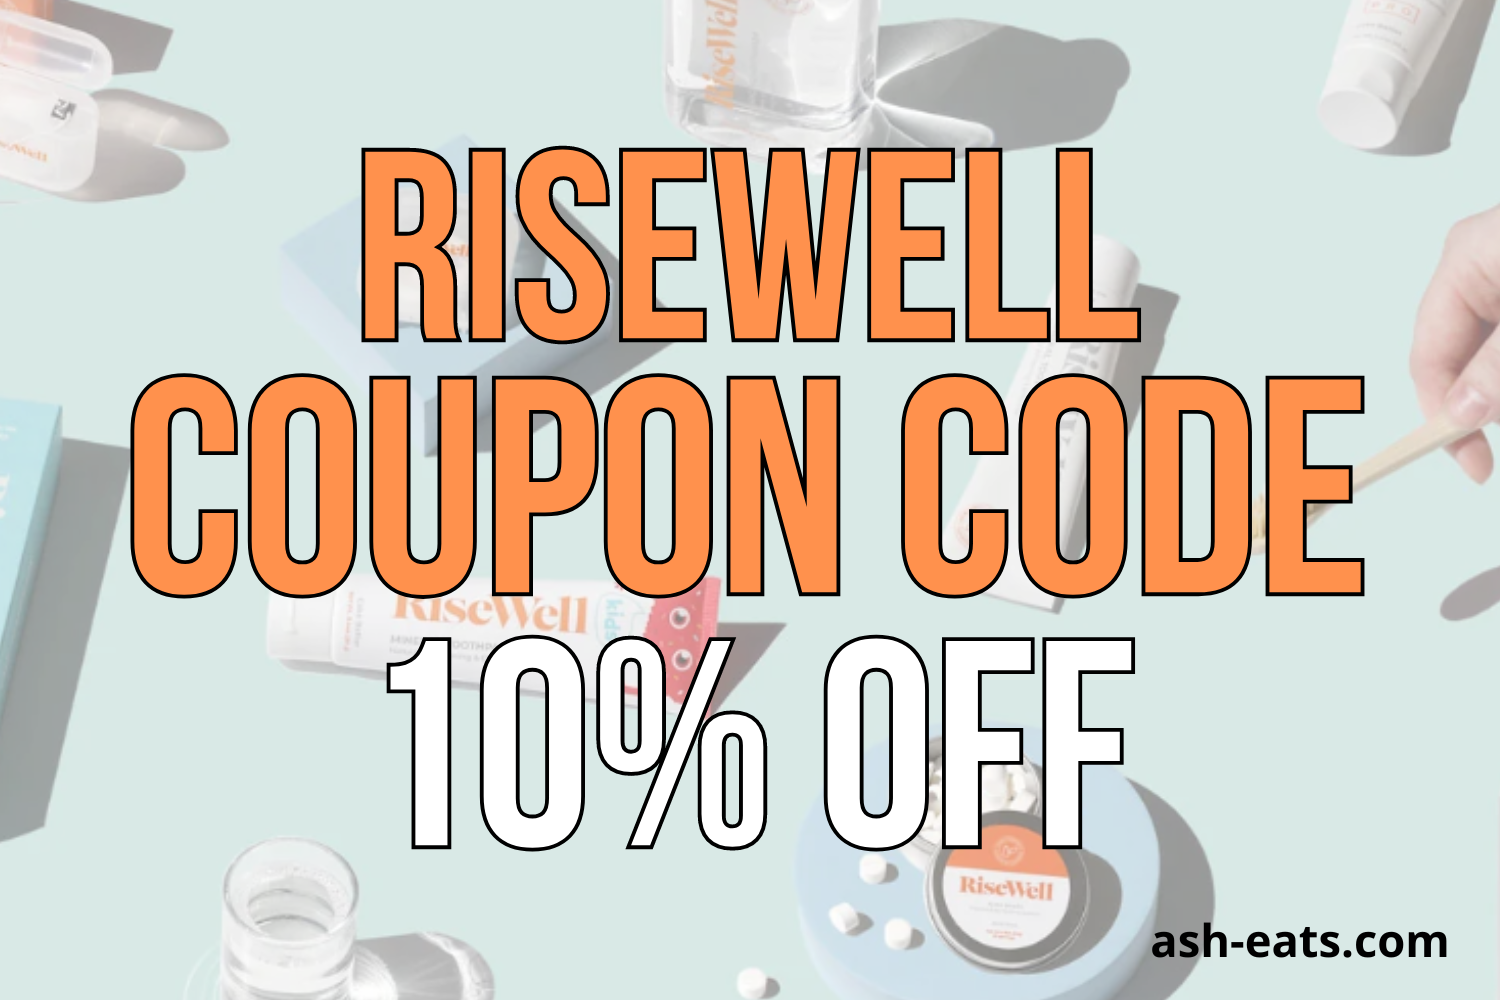 risewell coupon code